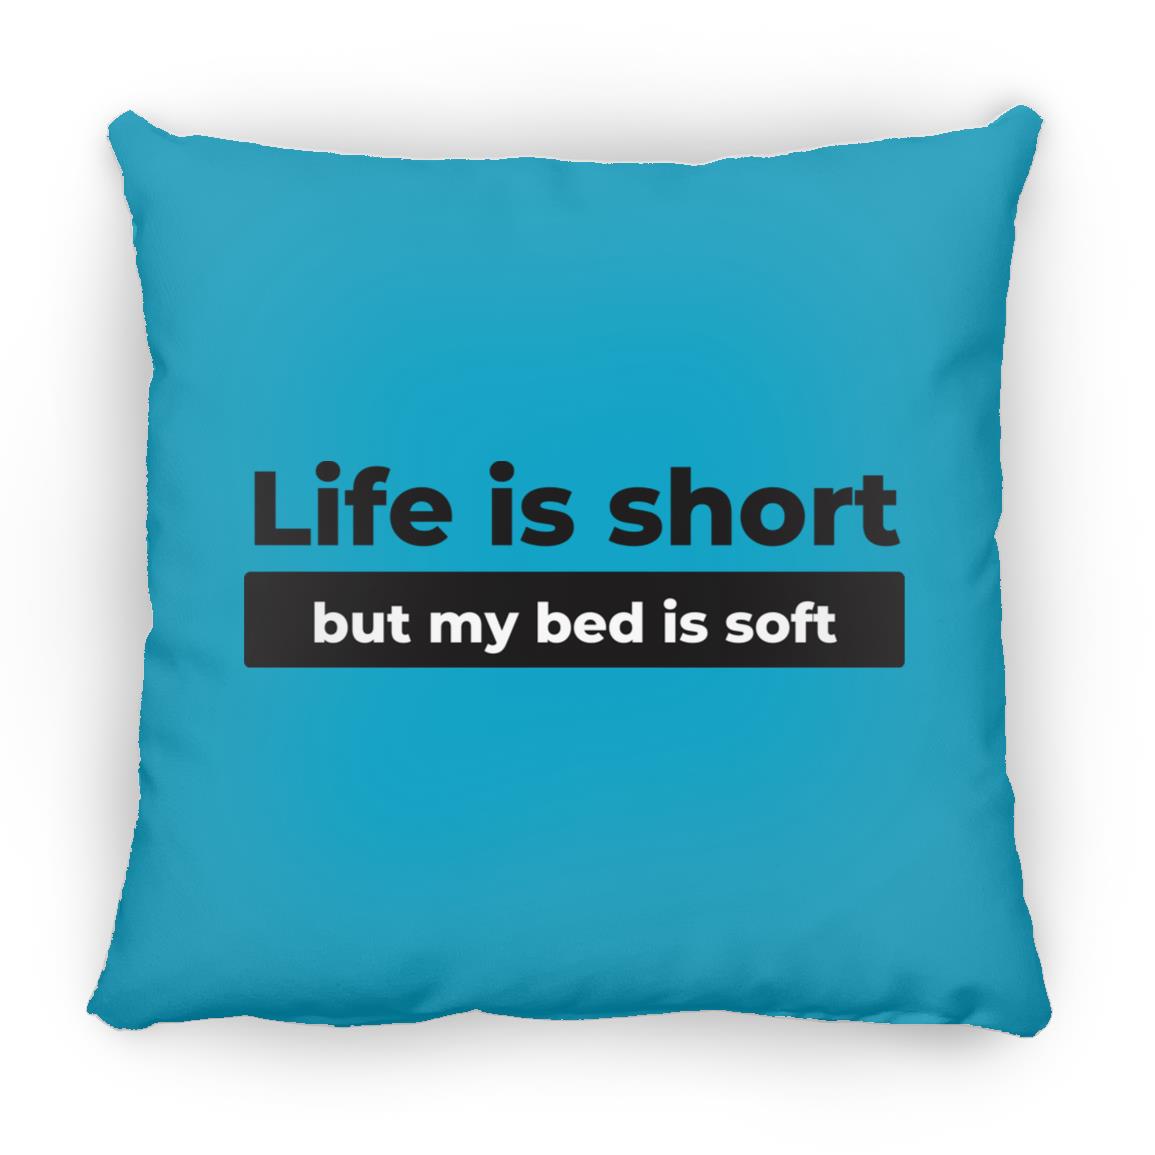 Life Is Short But My Bed Is Soft Small Square Pillow